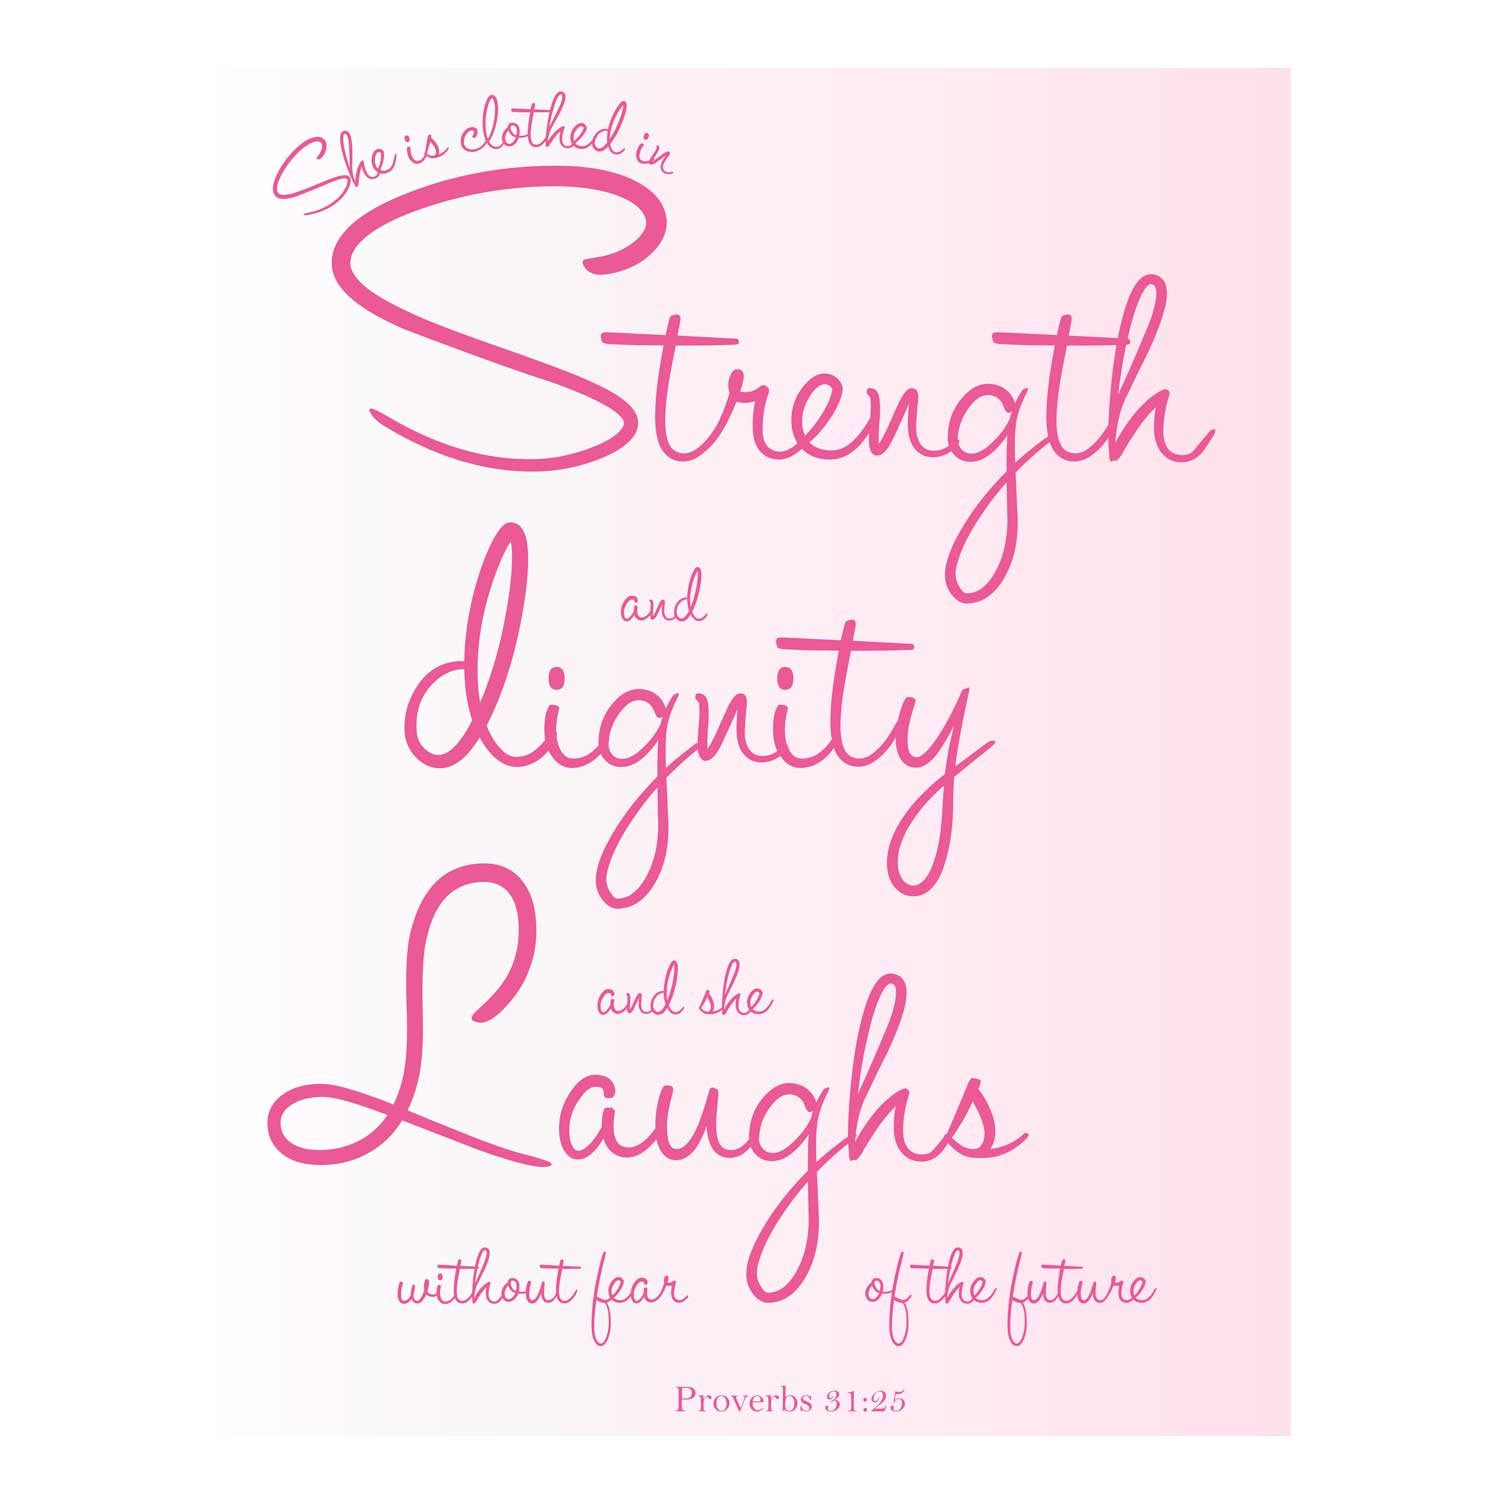 Proverbs 31:25 Typography